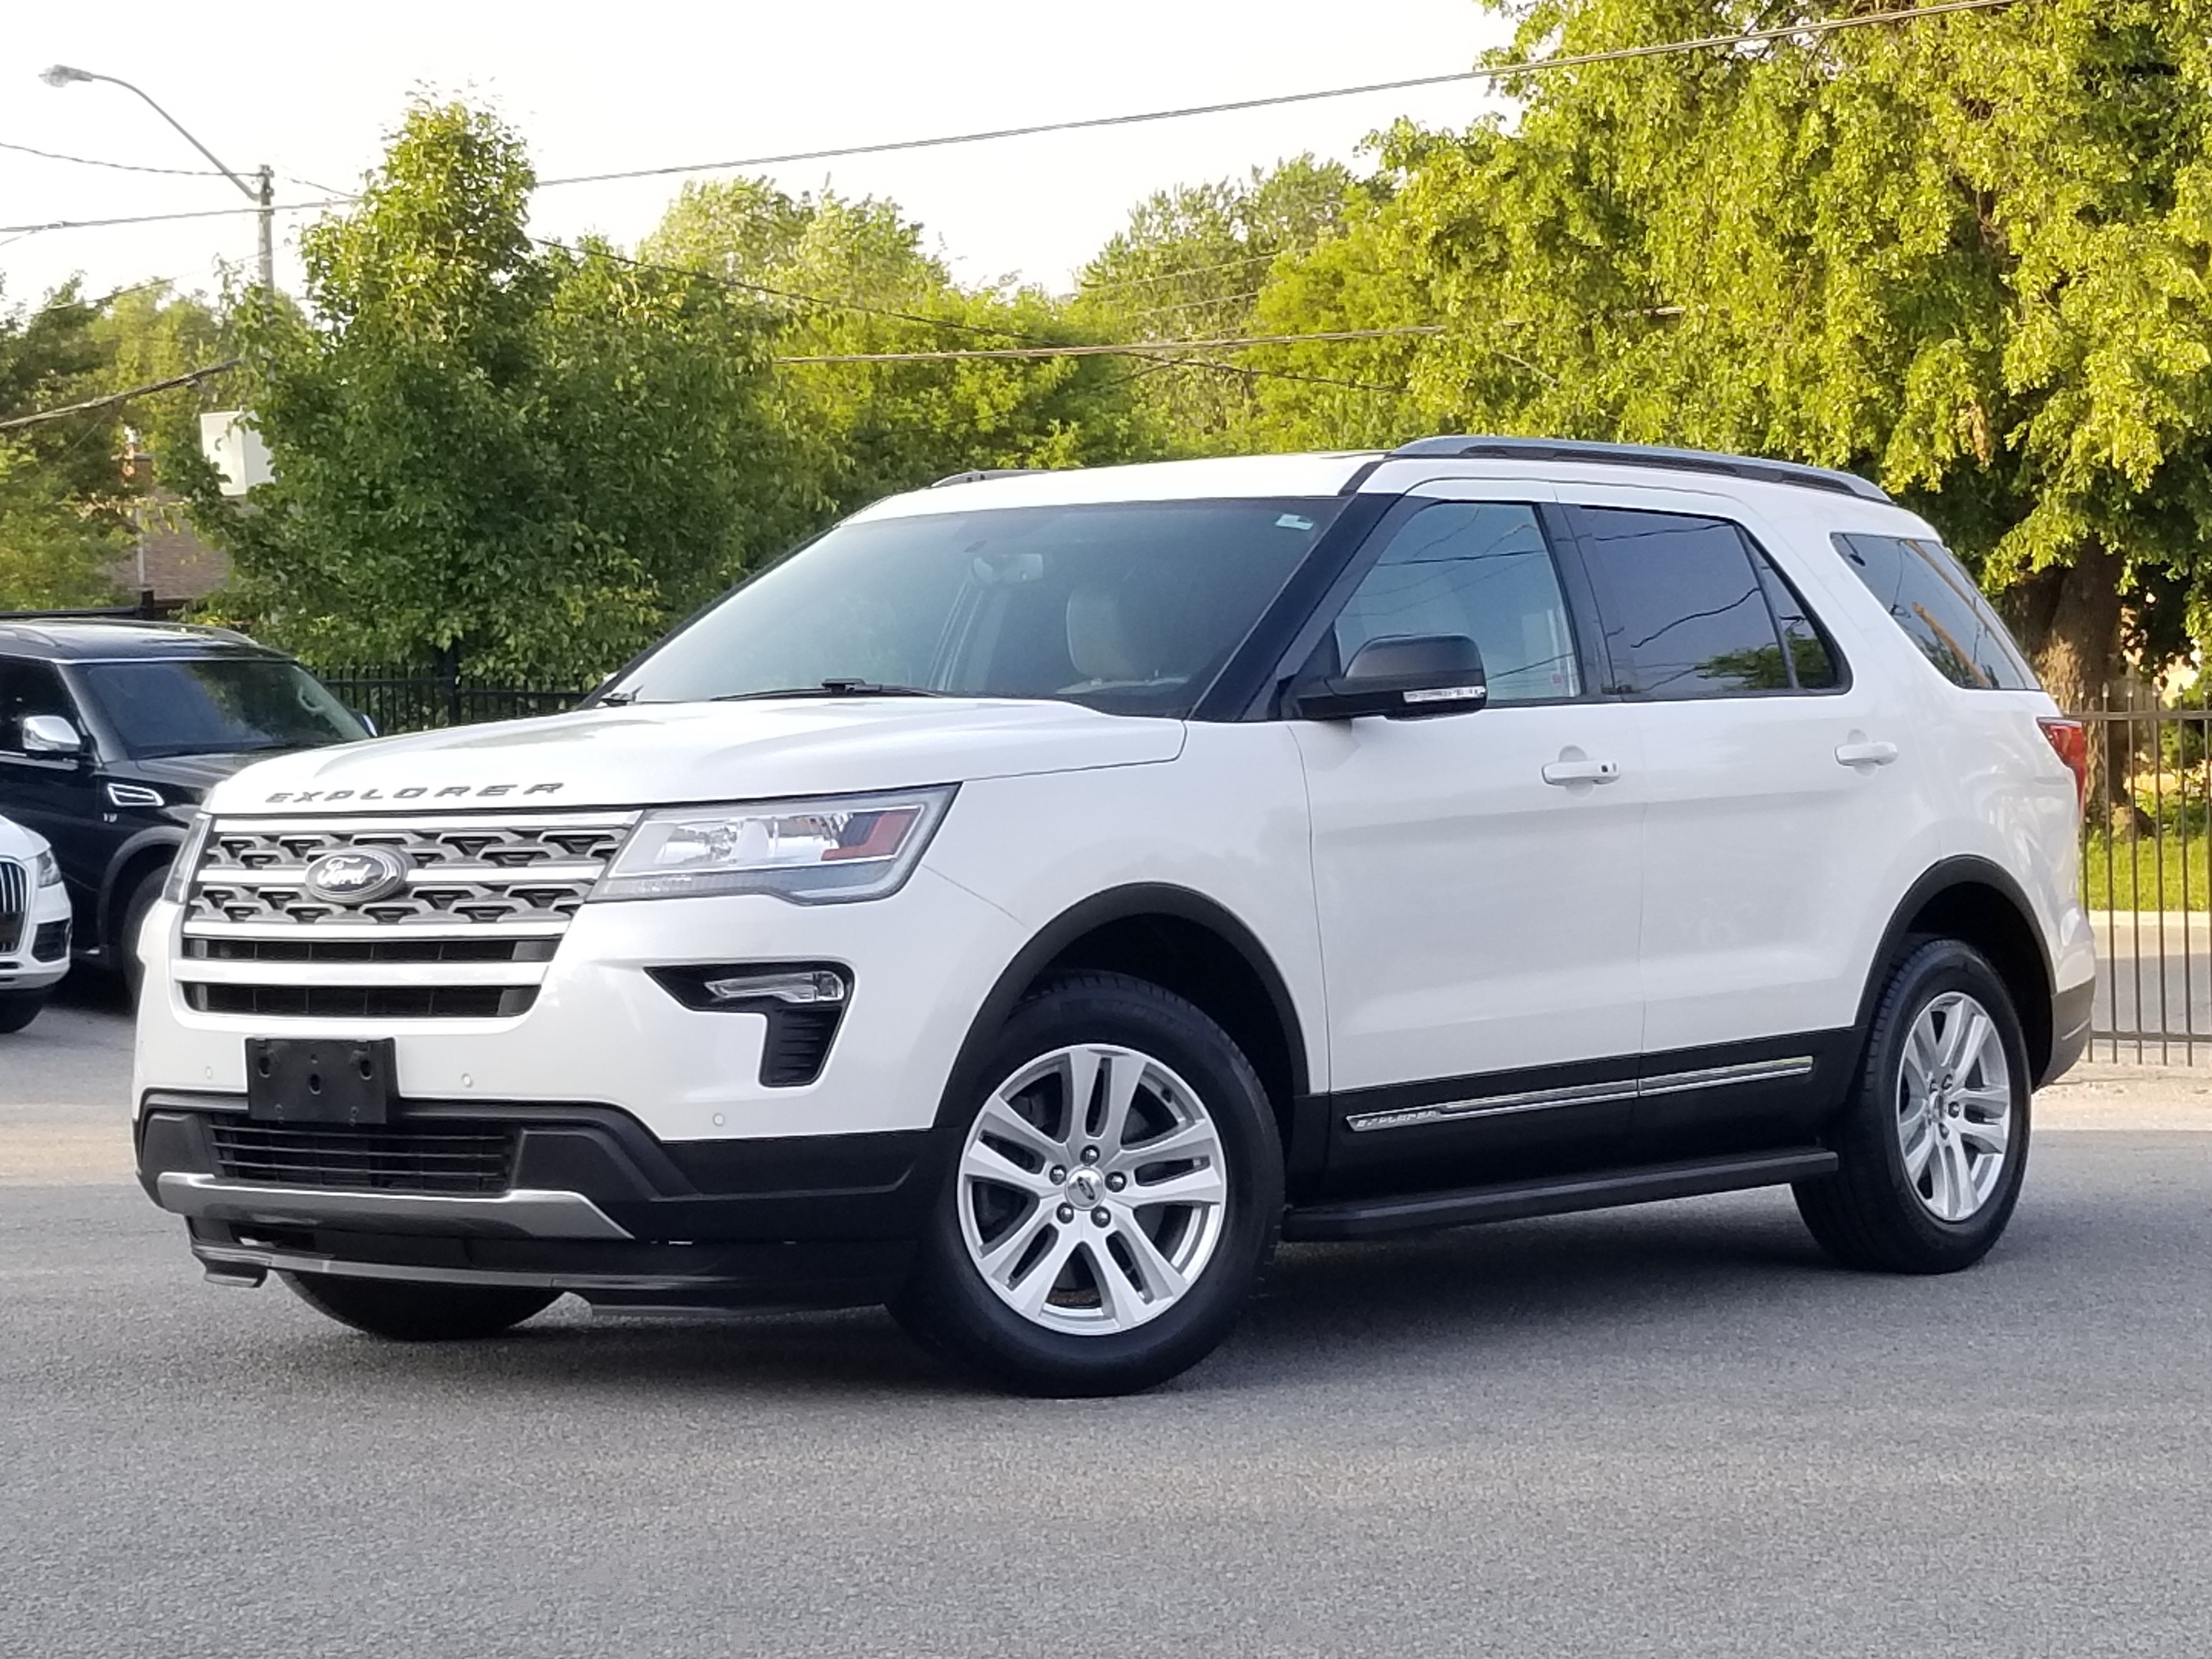 2018 Ford Explorer 4WD|LEATHER|NAV|CAMERA|PANO|RUNNING BOARDS|HEATEDS